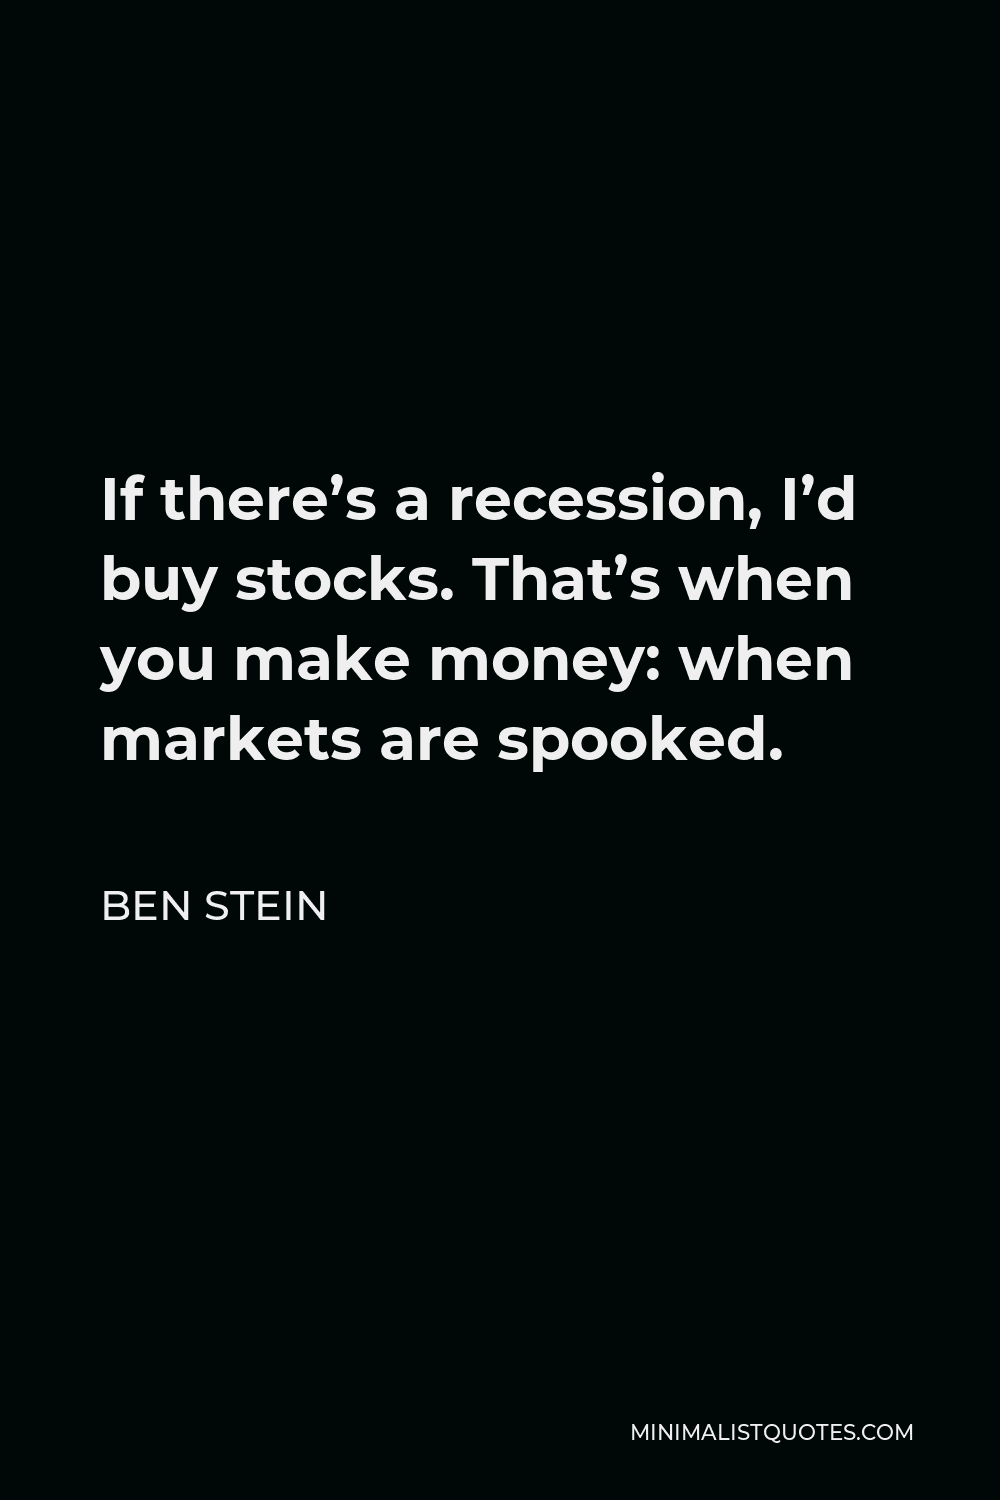 Ben Stein Quote - If there’s a recession, I’d buy stocks. That’s when you make money: when markets are spooked.